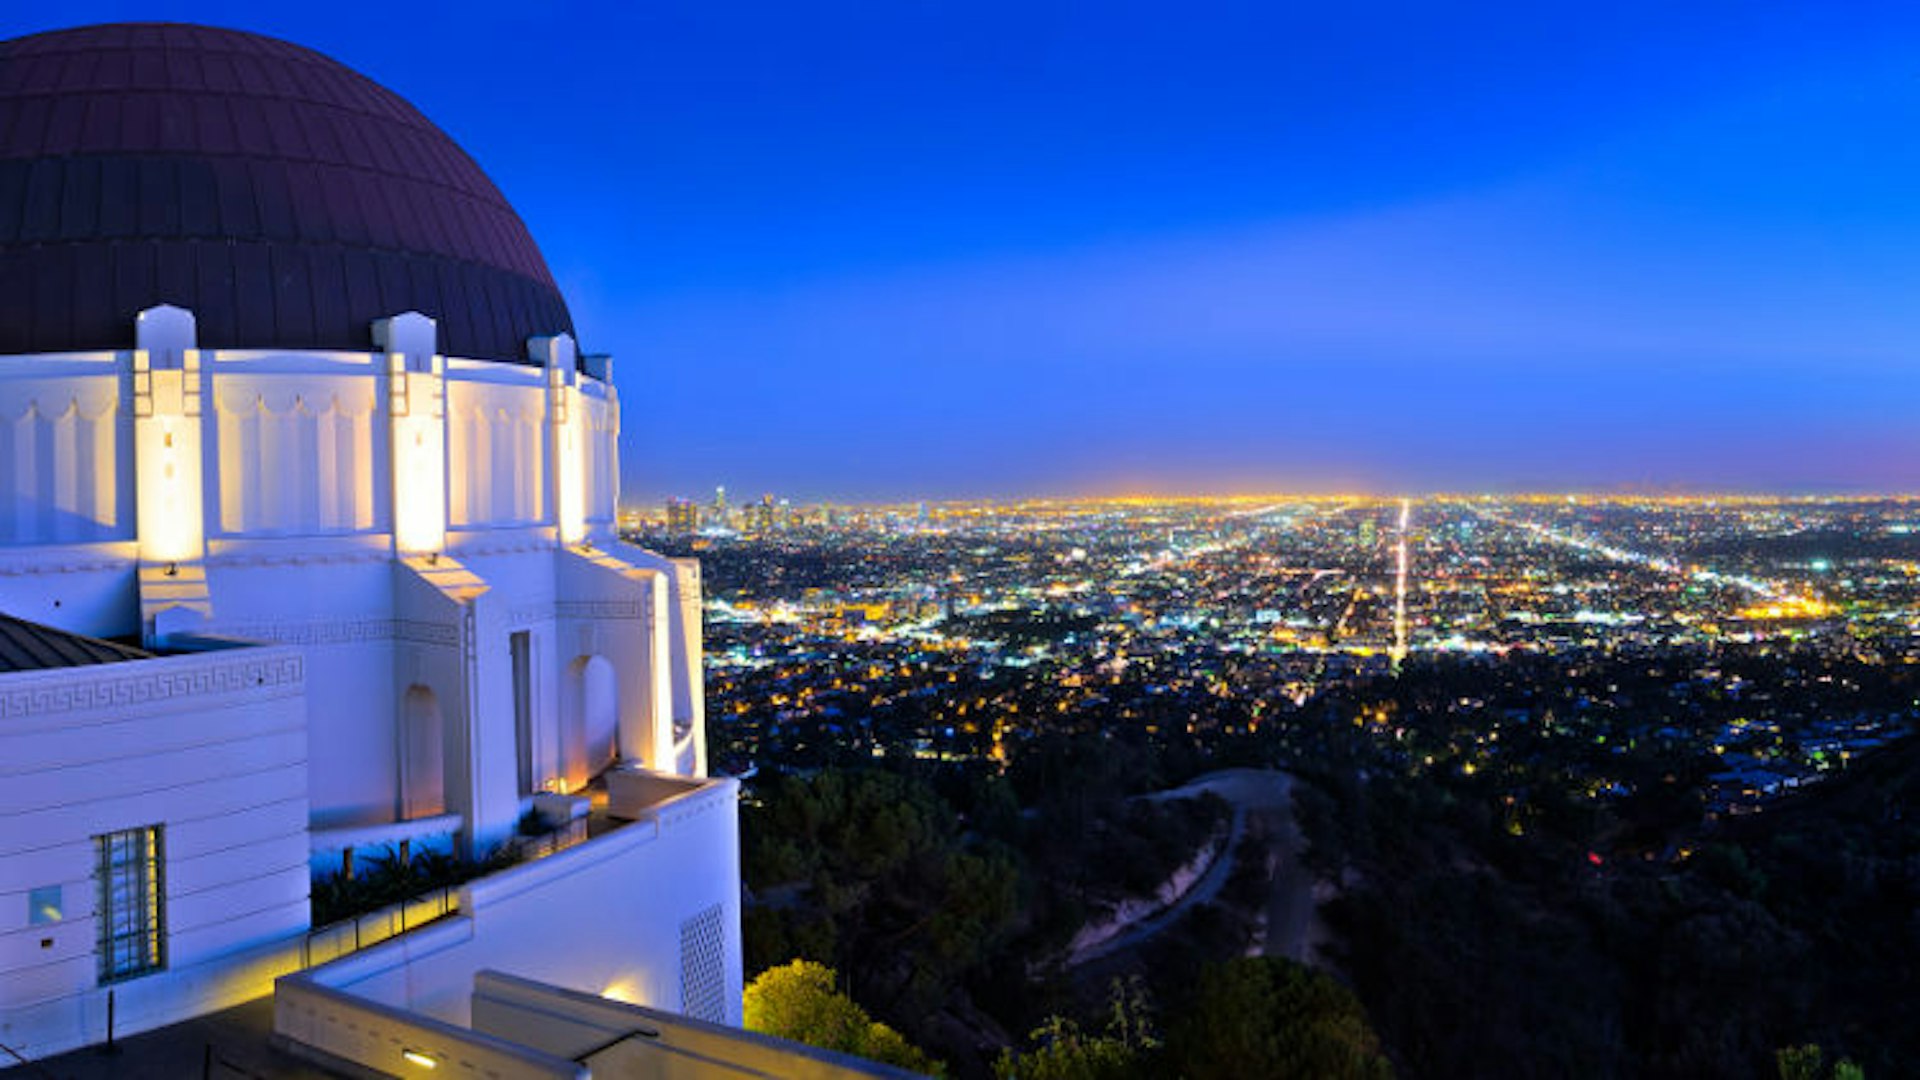 Griffith Observatory offers great views across Los Angeles. Image by Asim Bharwani / Getty 